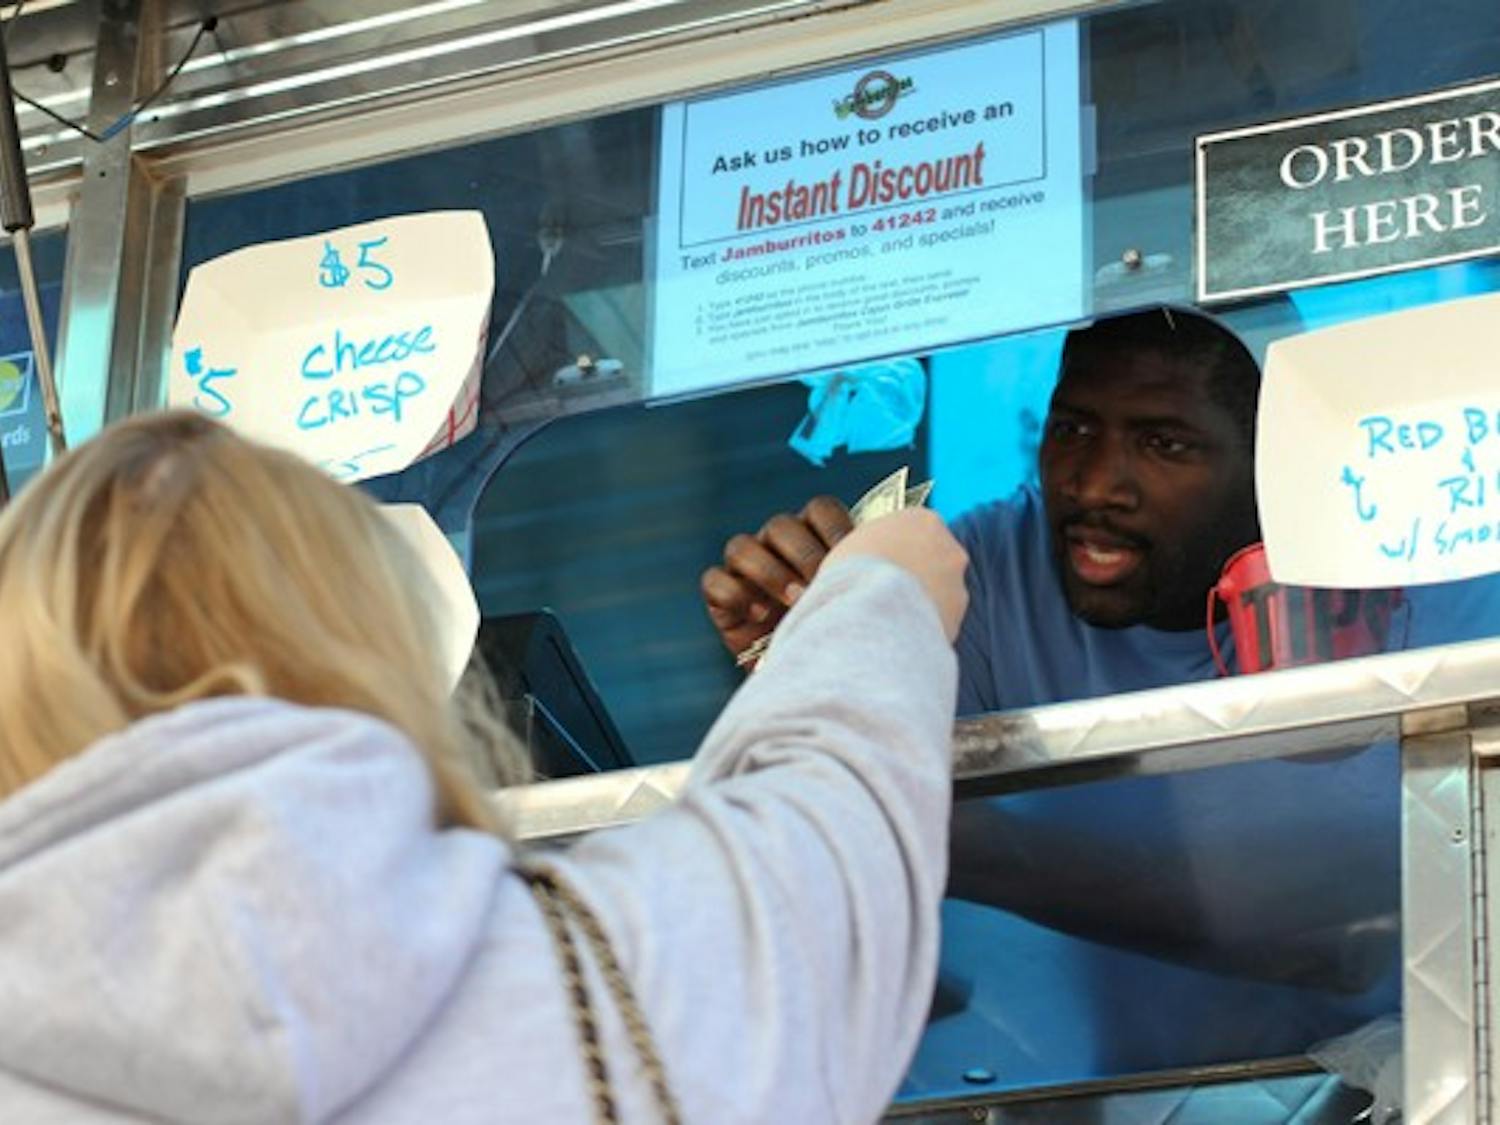 LOCAL CHOW: Food truck vendor Ray Pleasant takes orders from customers at the Food Truck Fiesta on Taylor Mall at the Downtown campus Tuesday. The food trucks were a kickoff event to spur interest in local businesses, sponsored by USG Downtown. (Photo by Lisa Bartoli)